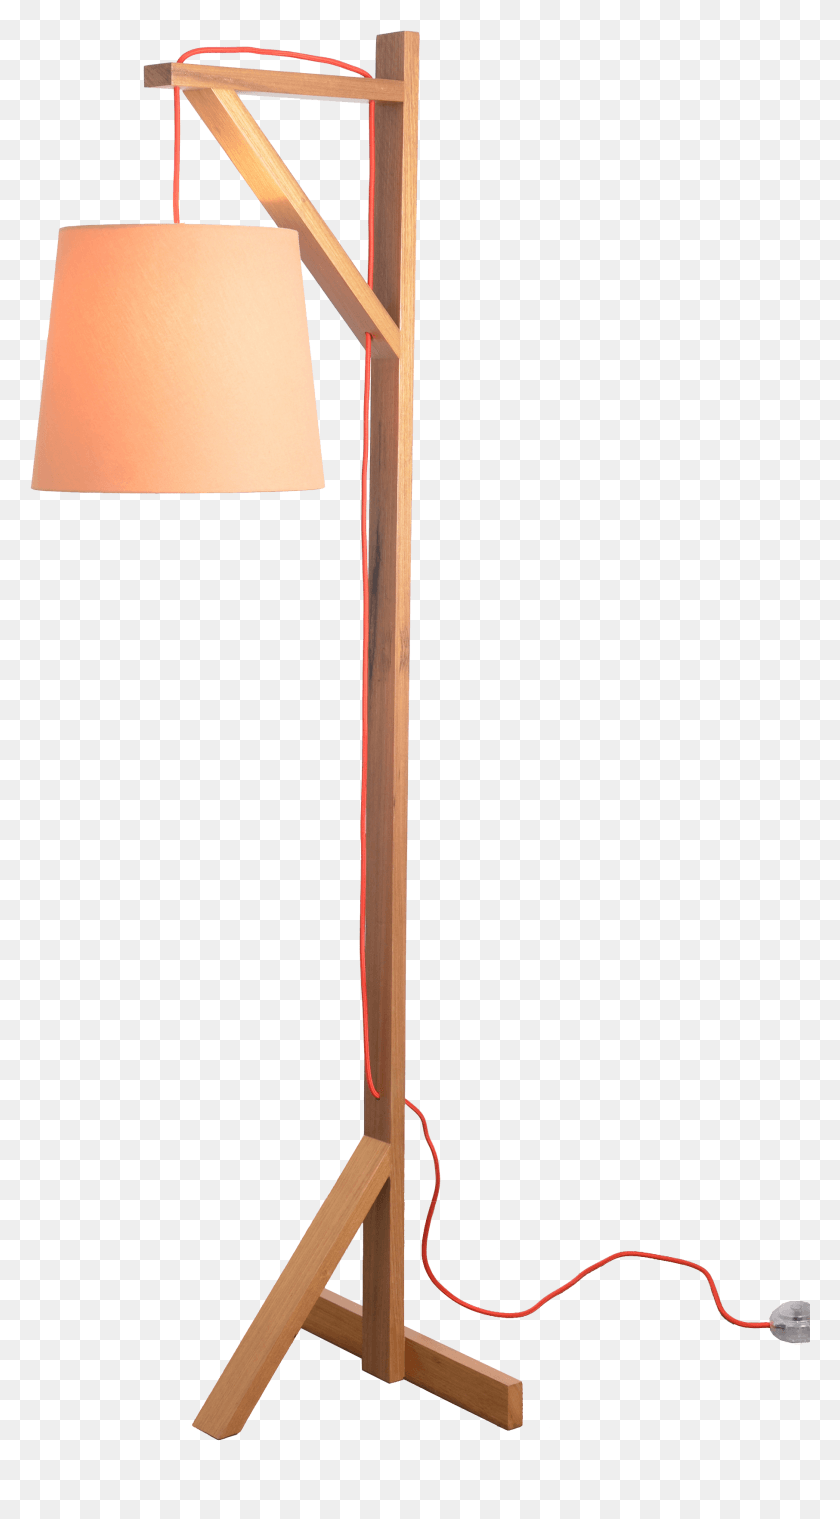 1812x3390 Pin By Shawn Phillips On Light Ideas Hacer Una Lampara De Madera Casera, Lamp, Lampshade, Table Lamp HD PNG Download